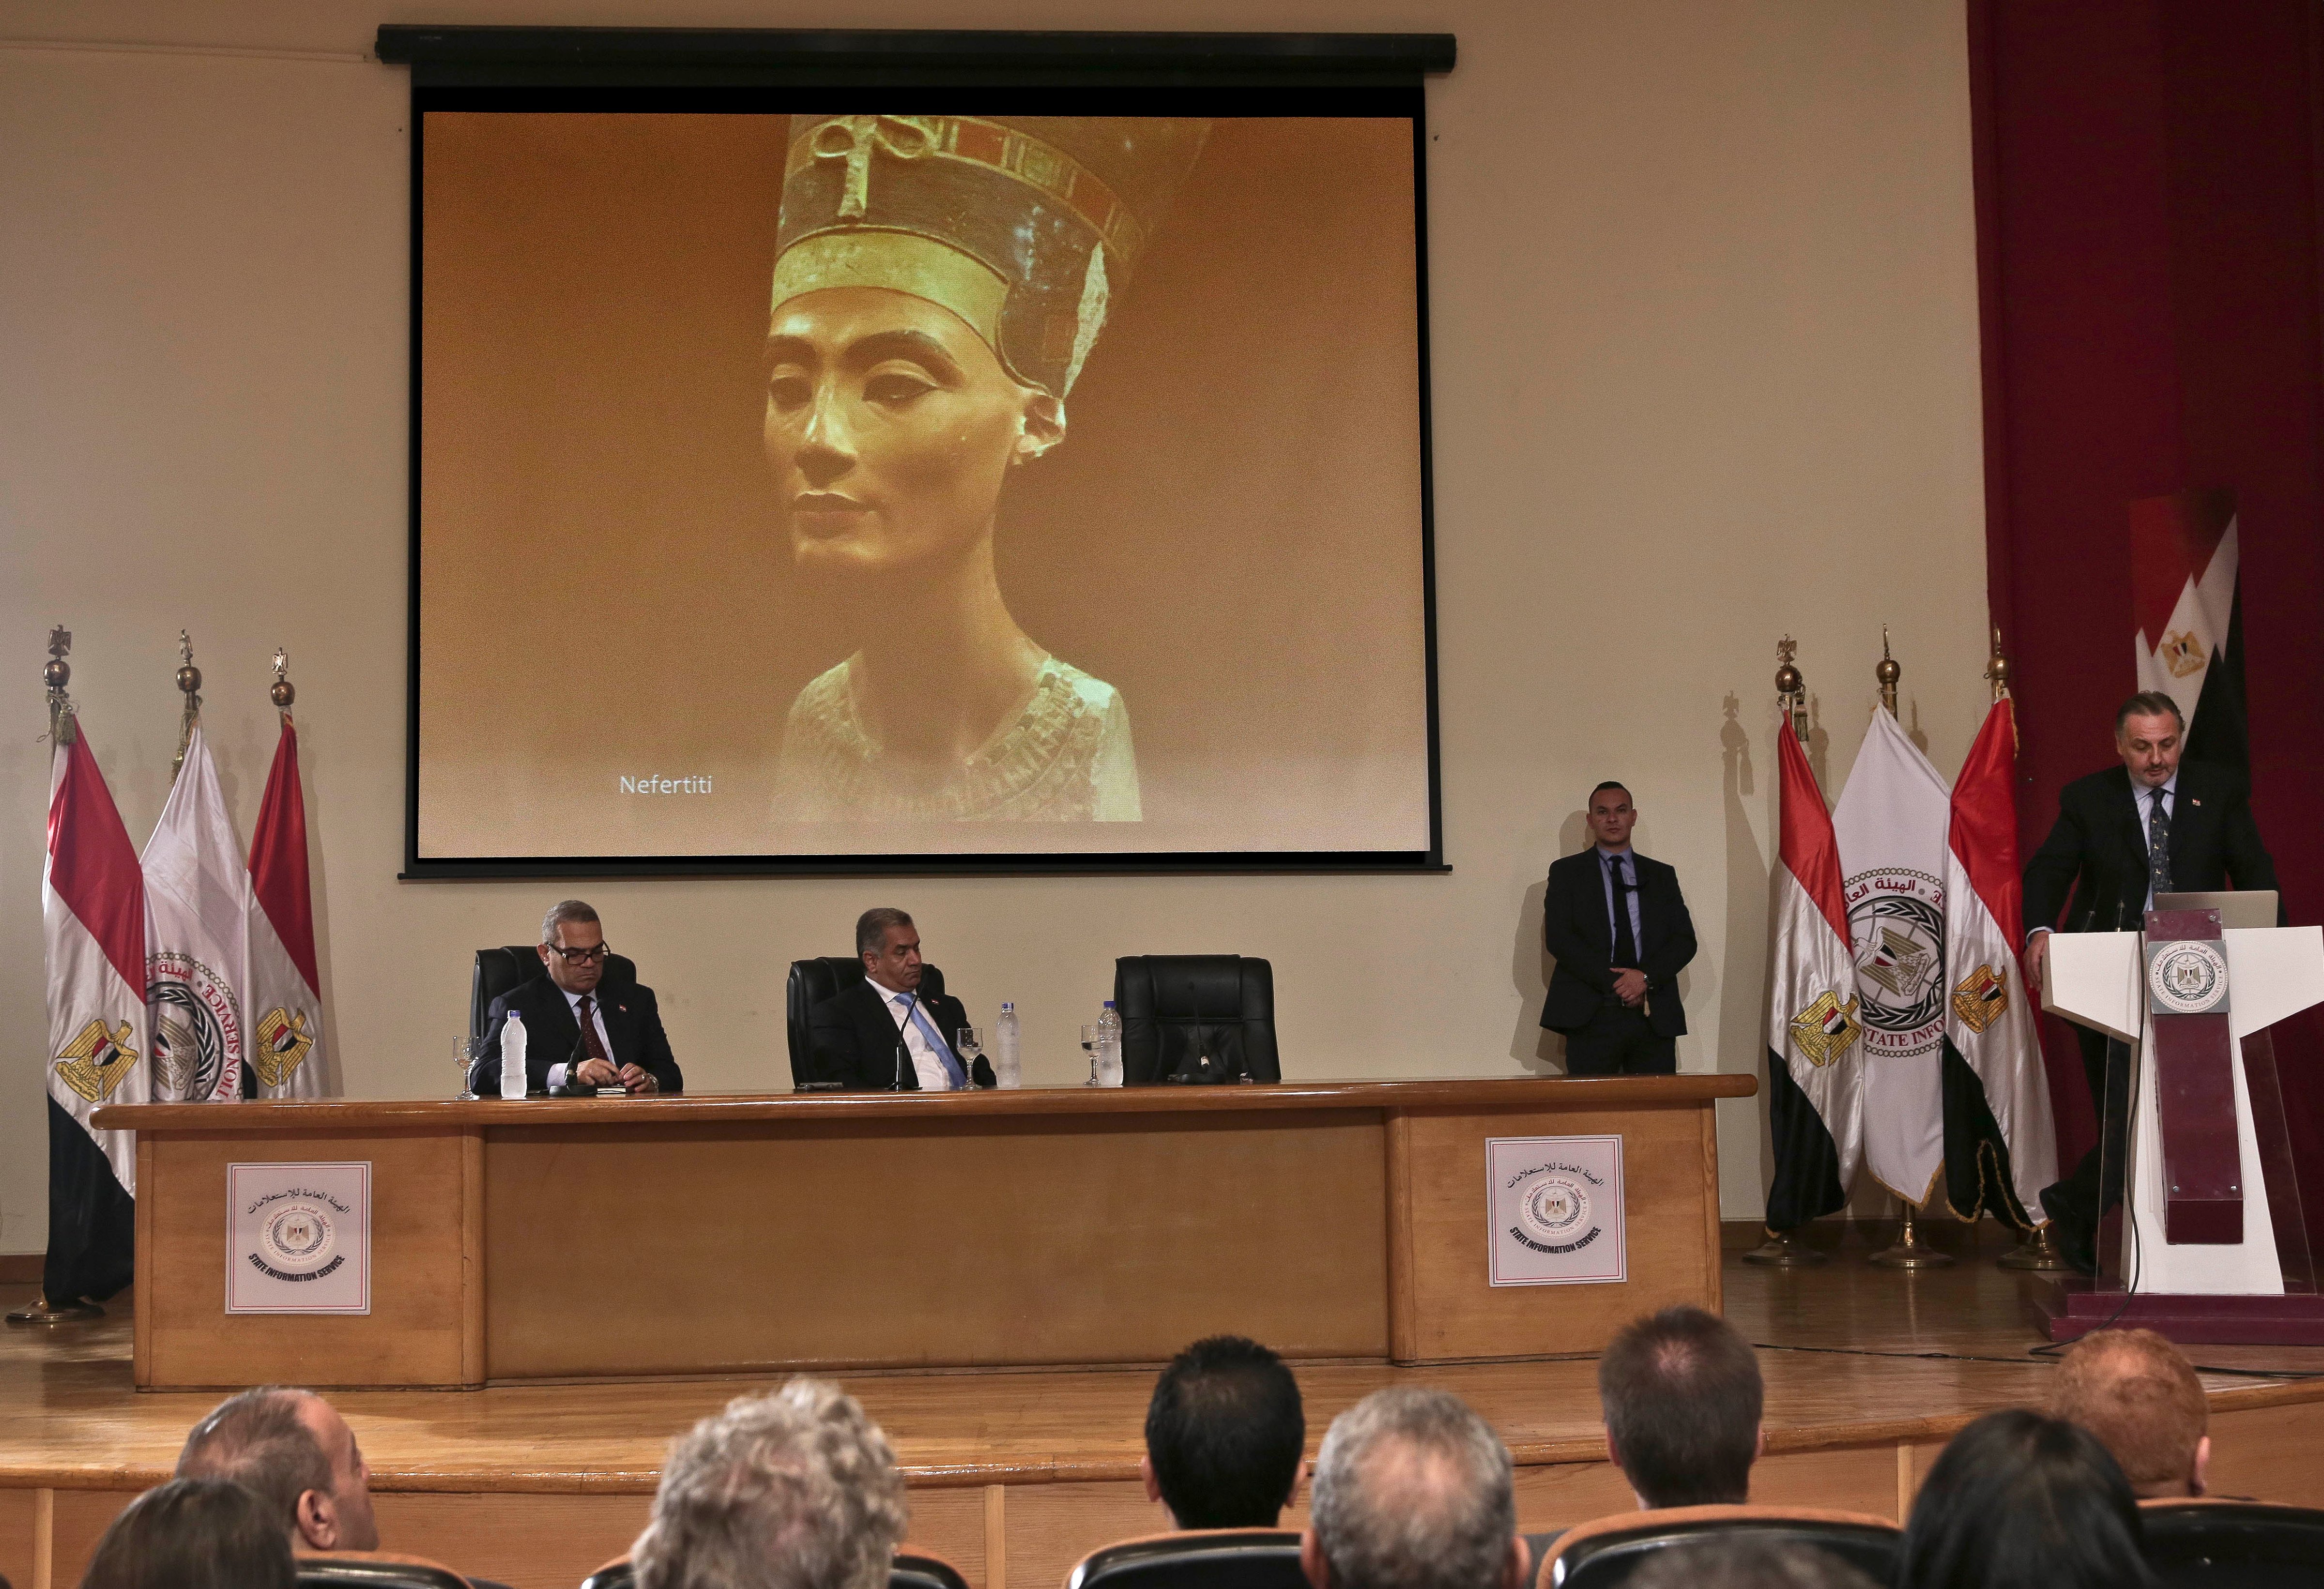 Nicholas Reeves, a British Egyptologist affiliated to the Egyptian expedition at the University of Arizona, right, speaks during a press conference with Egypt's Antiquities Minister Mamduh al-Damati, center, in Cairo, Oct. 1, 2015. (Nariman El-Mofty—AP)